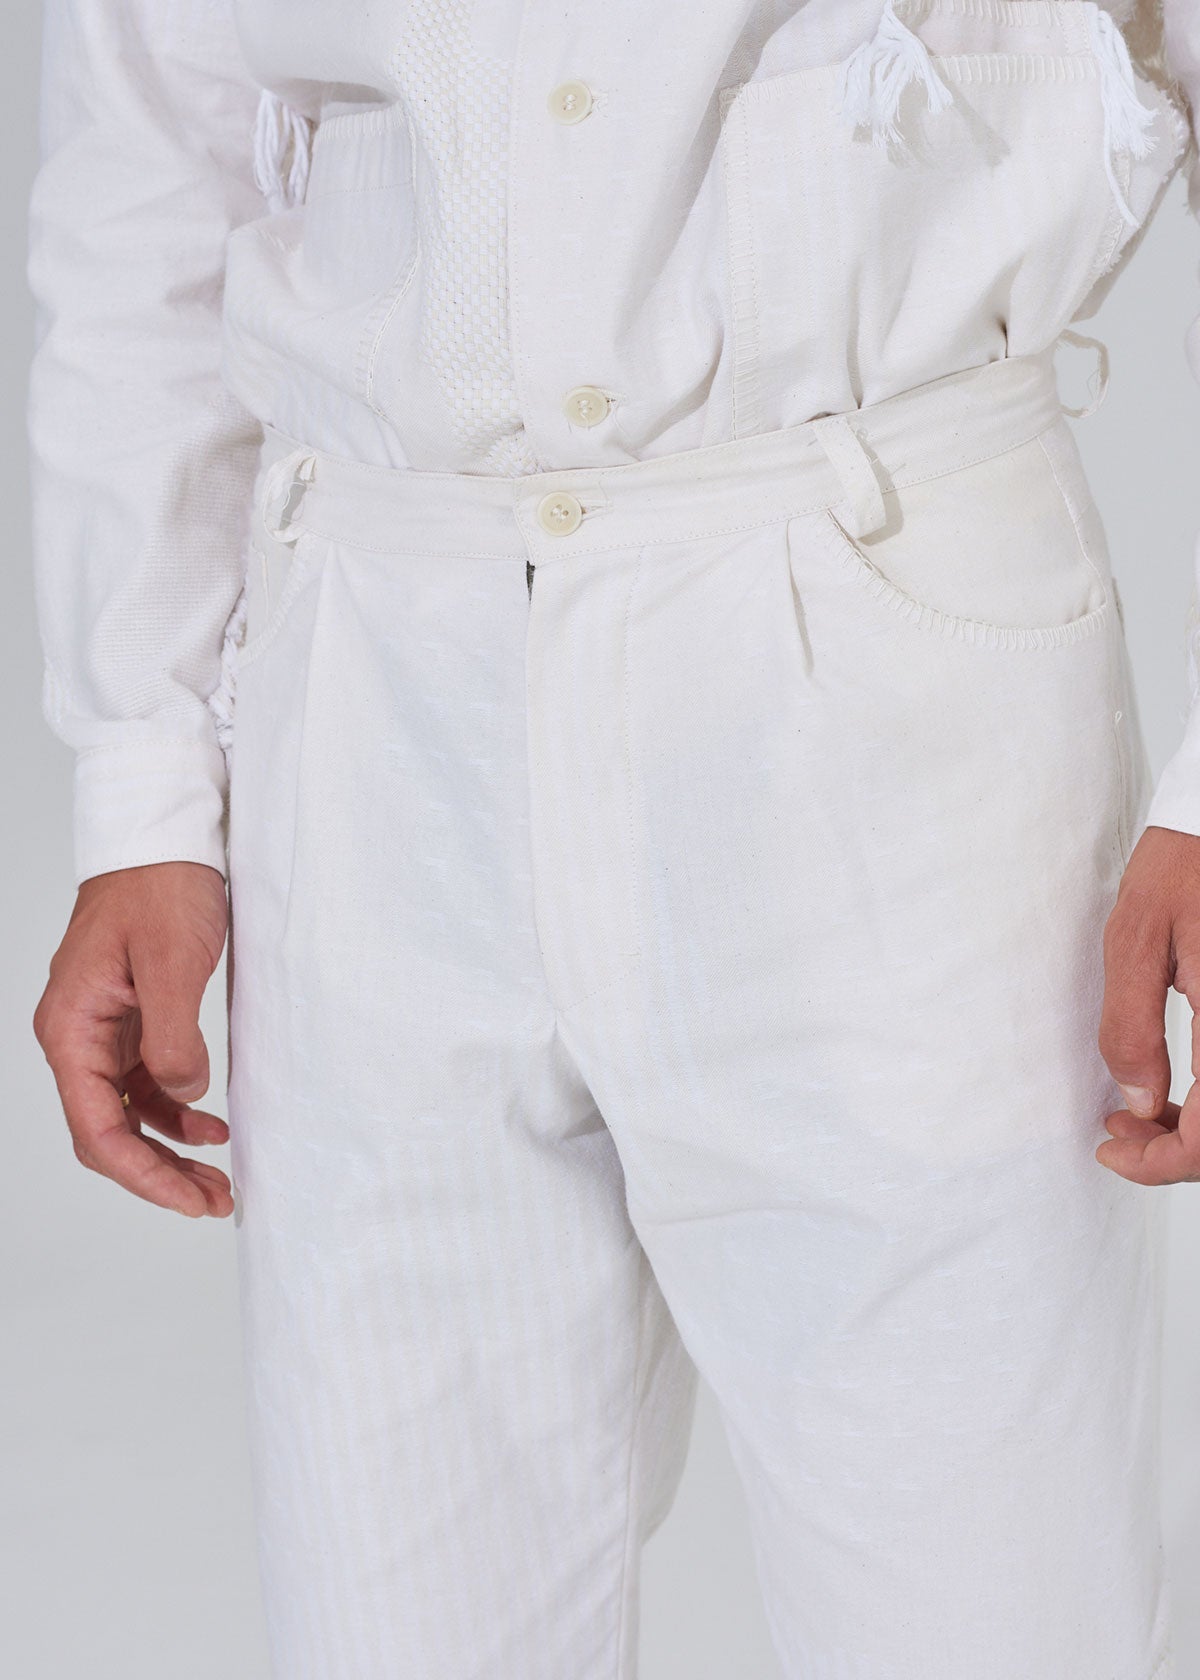 Edition 1 Trousers - Fringes on the Inside